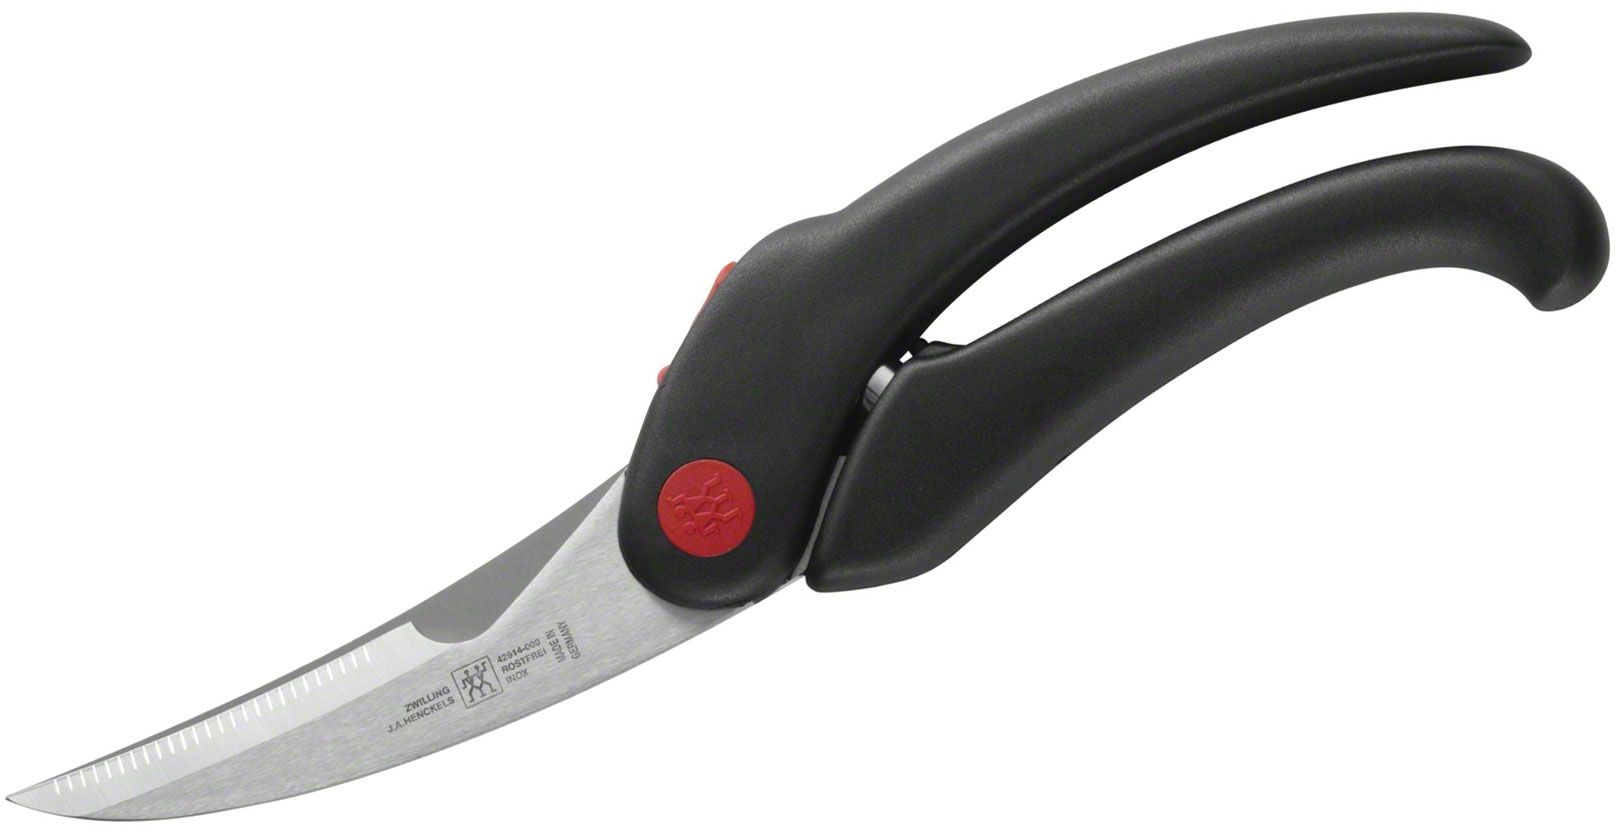 Zwilling J.A. Henckels Stainless Steel Poultry Shears – Cutlery